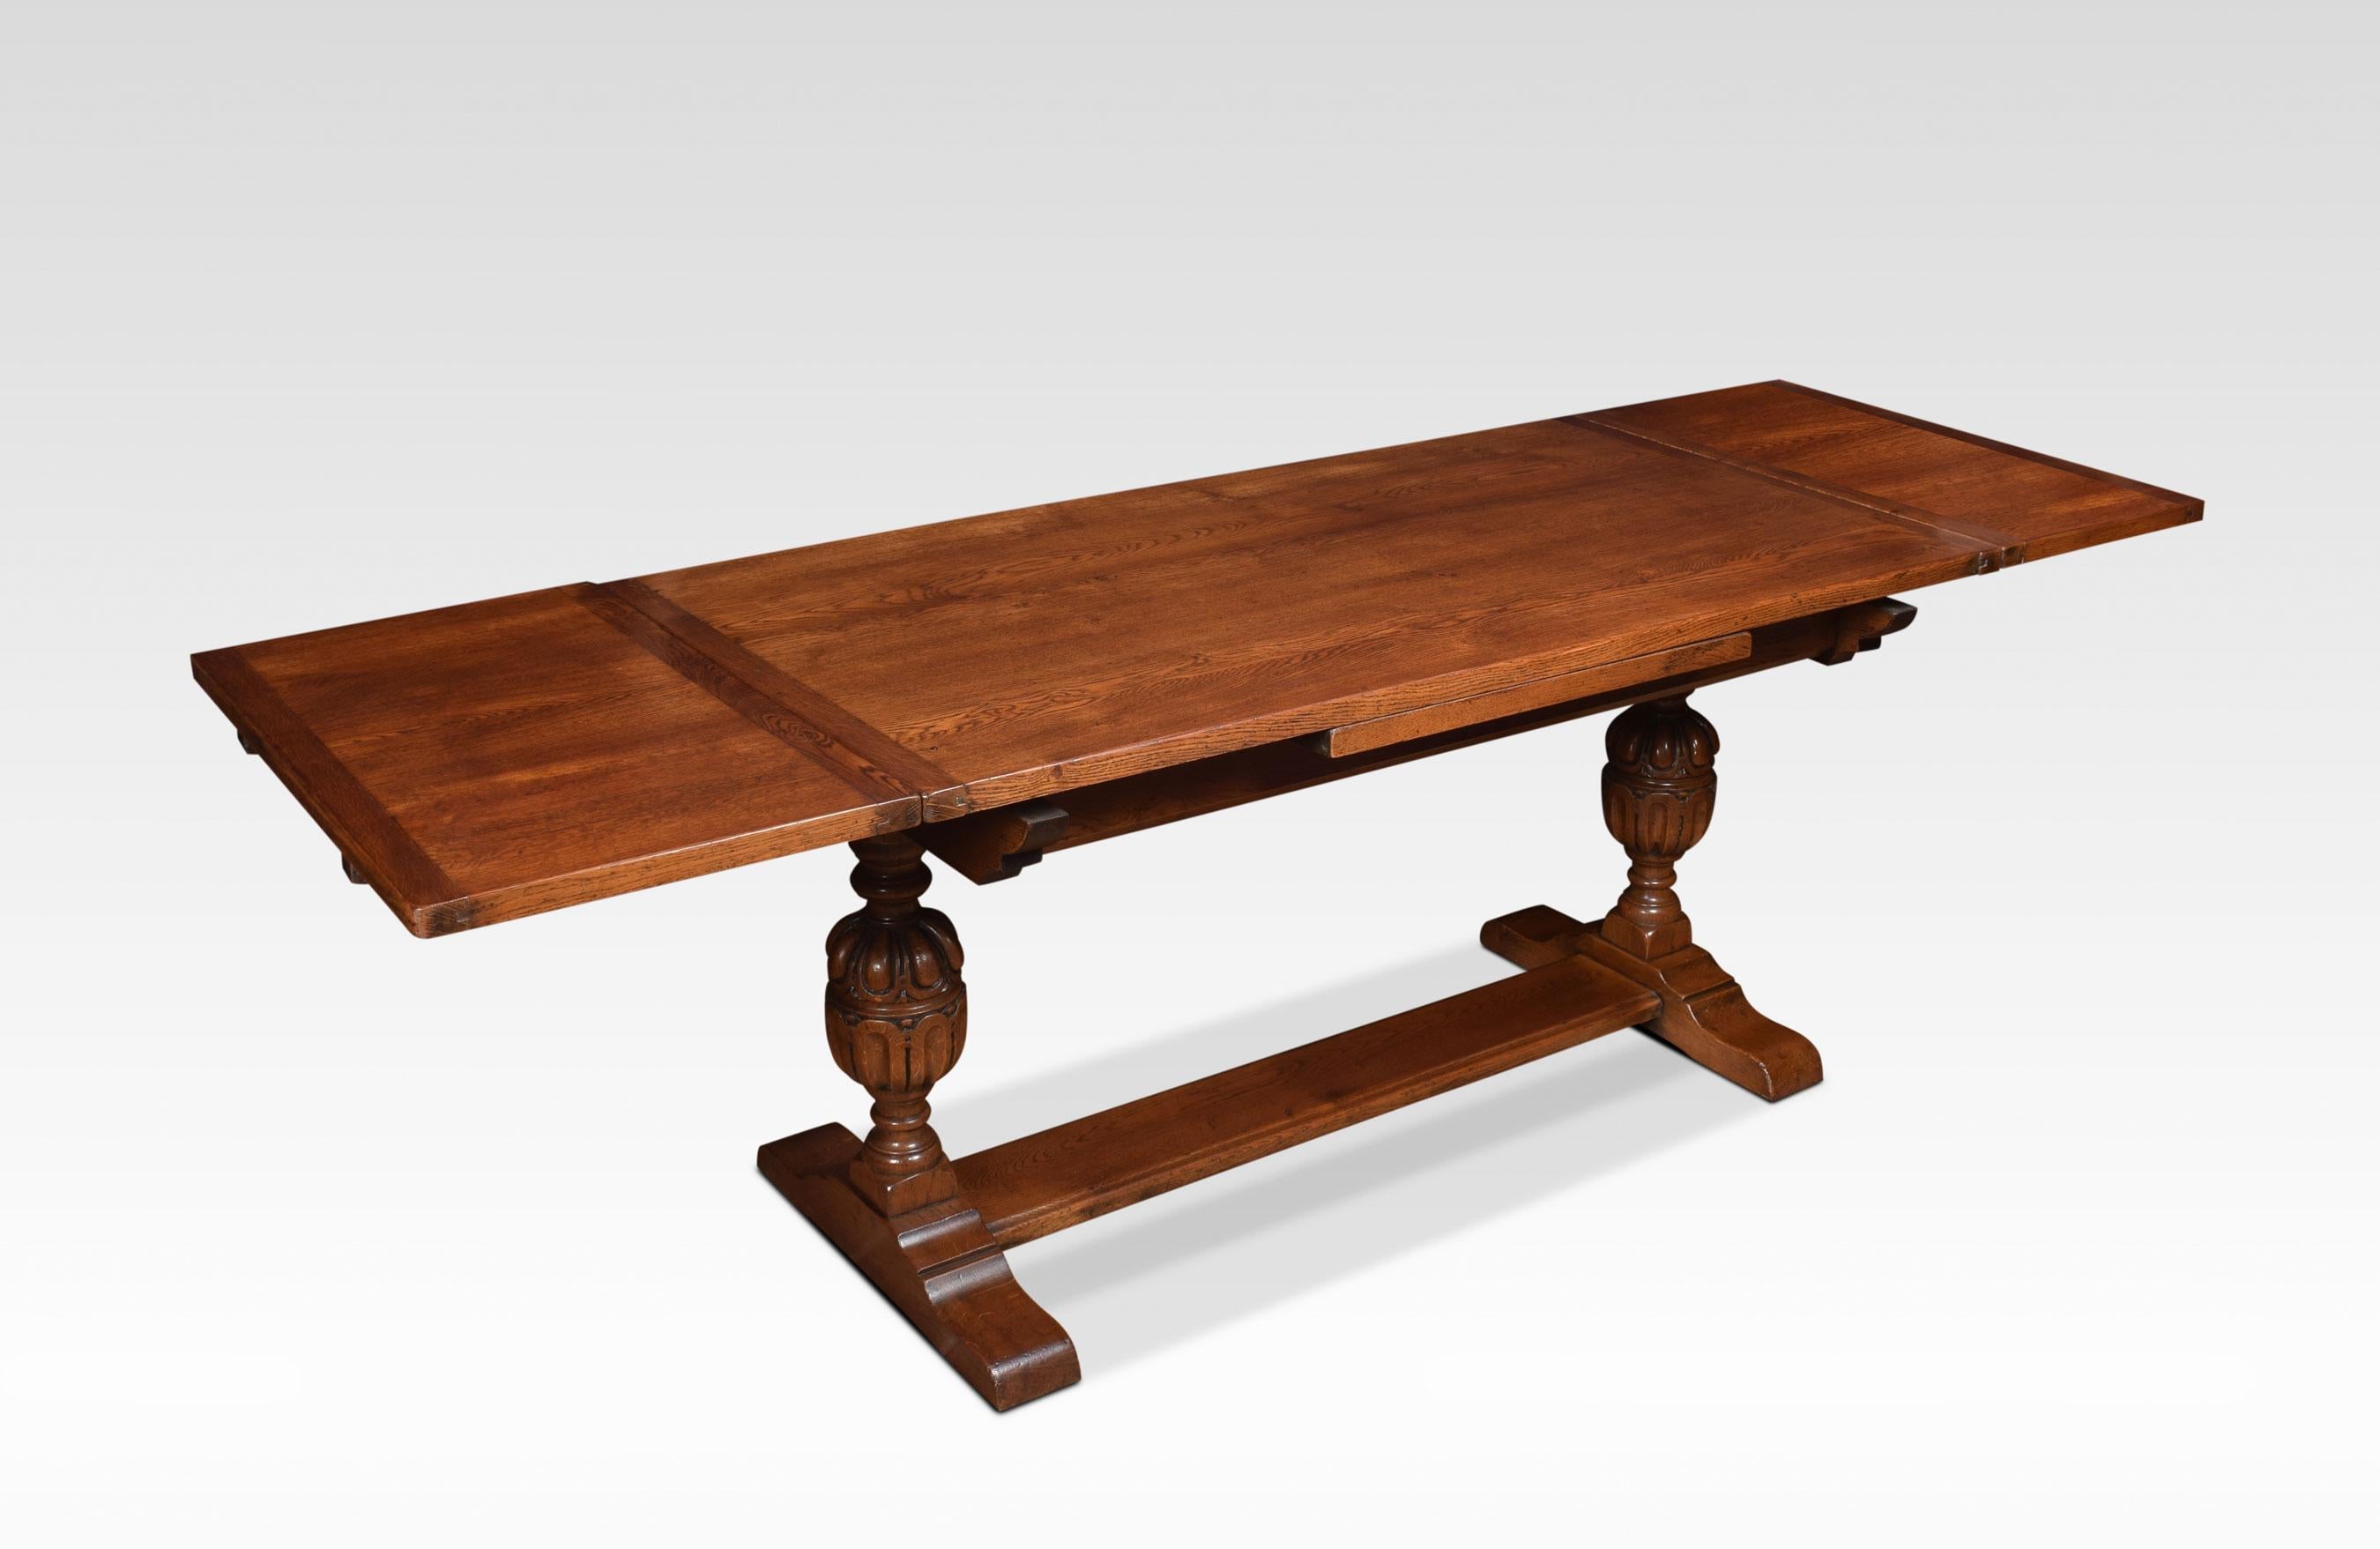 Oak draw leaf refectory table, the rectangular solid oak top having pull out ends. Above carved bulbous cup and cover supports united by a stretcher.
Dimensions
Height 30.5 inches
Width 60 inches when open 96 inches
Depth 31.5 inches.